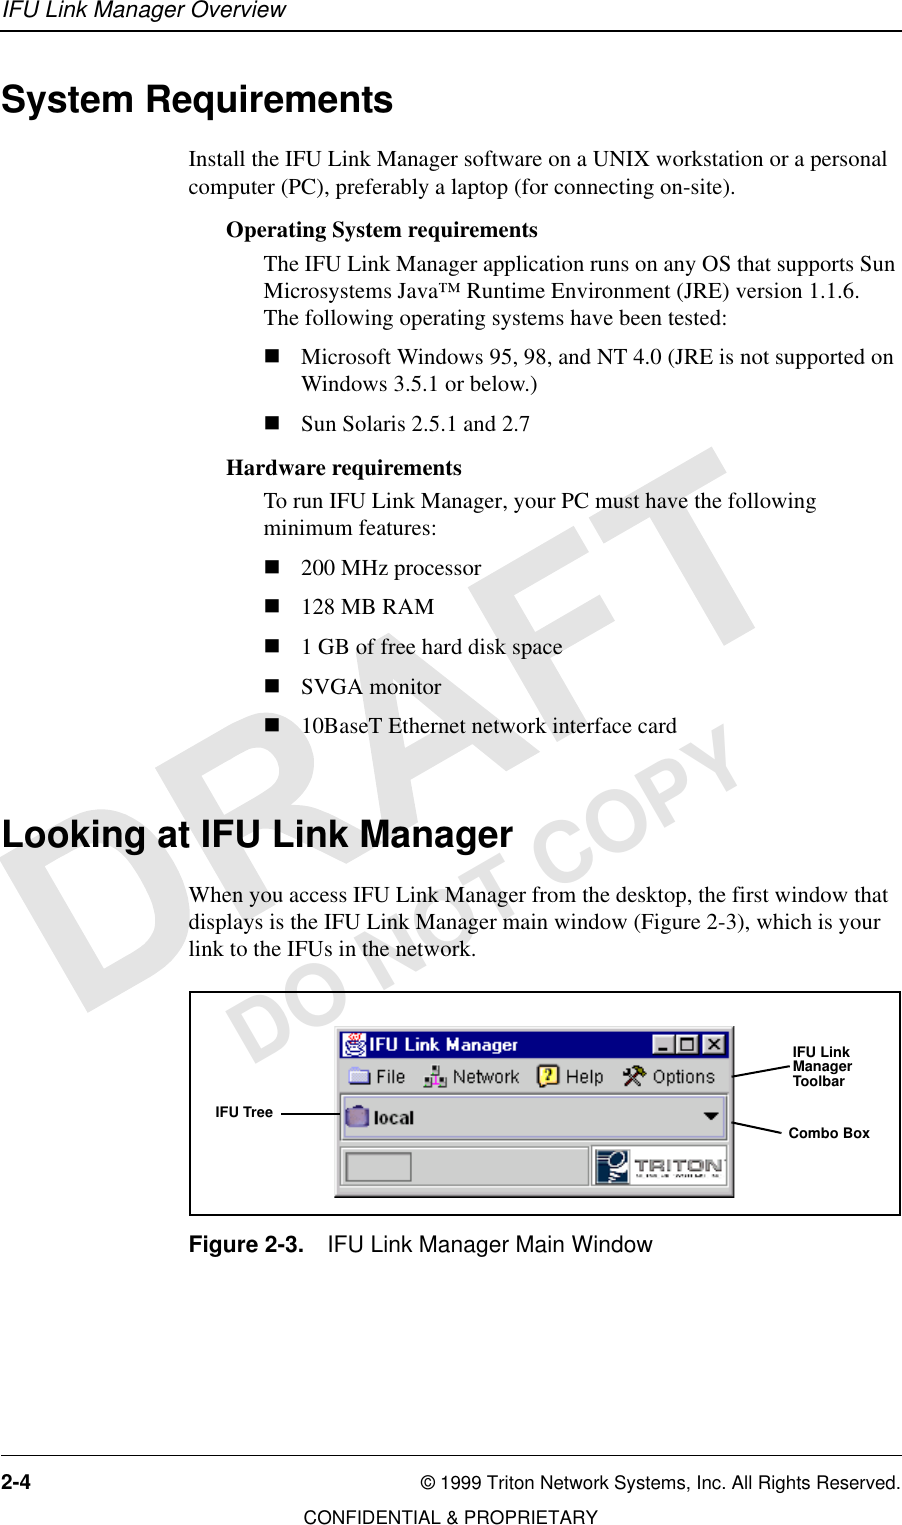 IFU Link Manager Overview2-4 © 1999 Triton Network Systems, Inc. All Rights Reserved.CONFIDENTIAL &amp; PROPRIETARYDO NOT COPYSystem RequirementsInstall the IFU Link Manager software on a UNIX workstation or a personal computer (PC), preferably a laptop (for connecting on-site).Operating System requirementsThe IFU Link Manager application runs on any OS that supports Sun Microsystems Java™ Runtime Environment (JRE) version 1.1.6.  The following operating systems have been tested: nMicrosoft Windows 95, 98, and NT 4.0 (JRE is not supported on Windows 3.5.1 or below.)nSun Solaris 2.5.1 and 2.7Hardware requirementsTo run IFU Link Manager, your PC must have the following minimum features:n200 MHz processorn128 MB RAMn1 GB of free hard disk spacenSVGA monitorn10BaseT Ethernet network interface cardLooking at IFU Link ManagerWhen you access IFU Link Manager from the desktop, the first window that displays is the IFU Link Manager main window (Figure 2-3), which is your link to the IFUs in the network.Figure 2-3. IFU Link Manager Main WindowIFU Link Manager ToolbarIFU TreeCombo Box